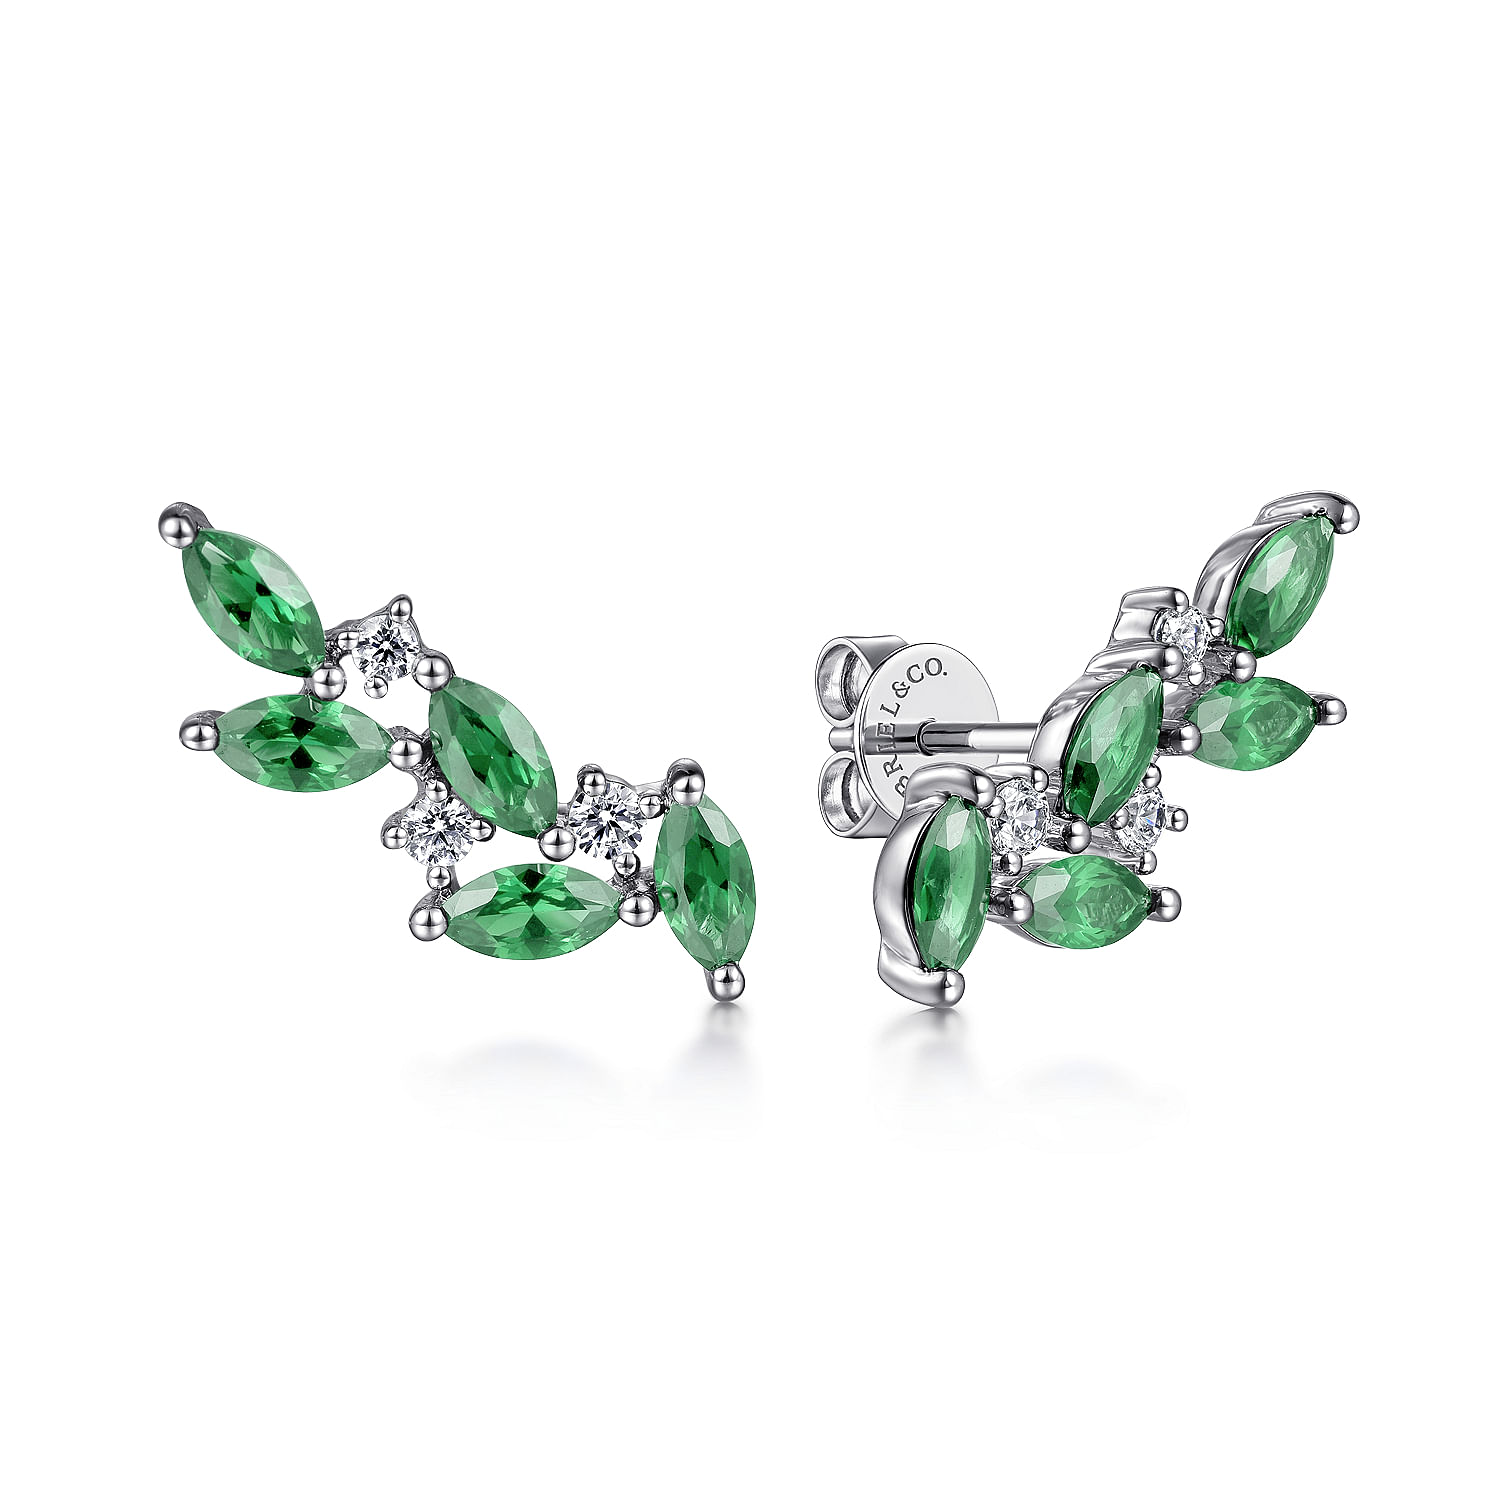 14K White Gold Diamond and Marquise Emerald Ear Climber Earrings